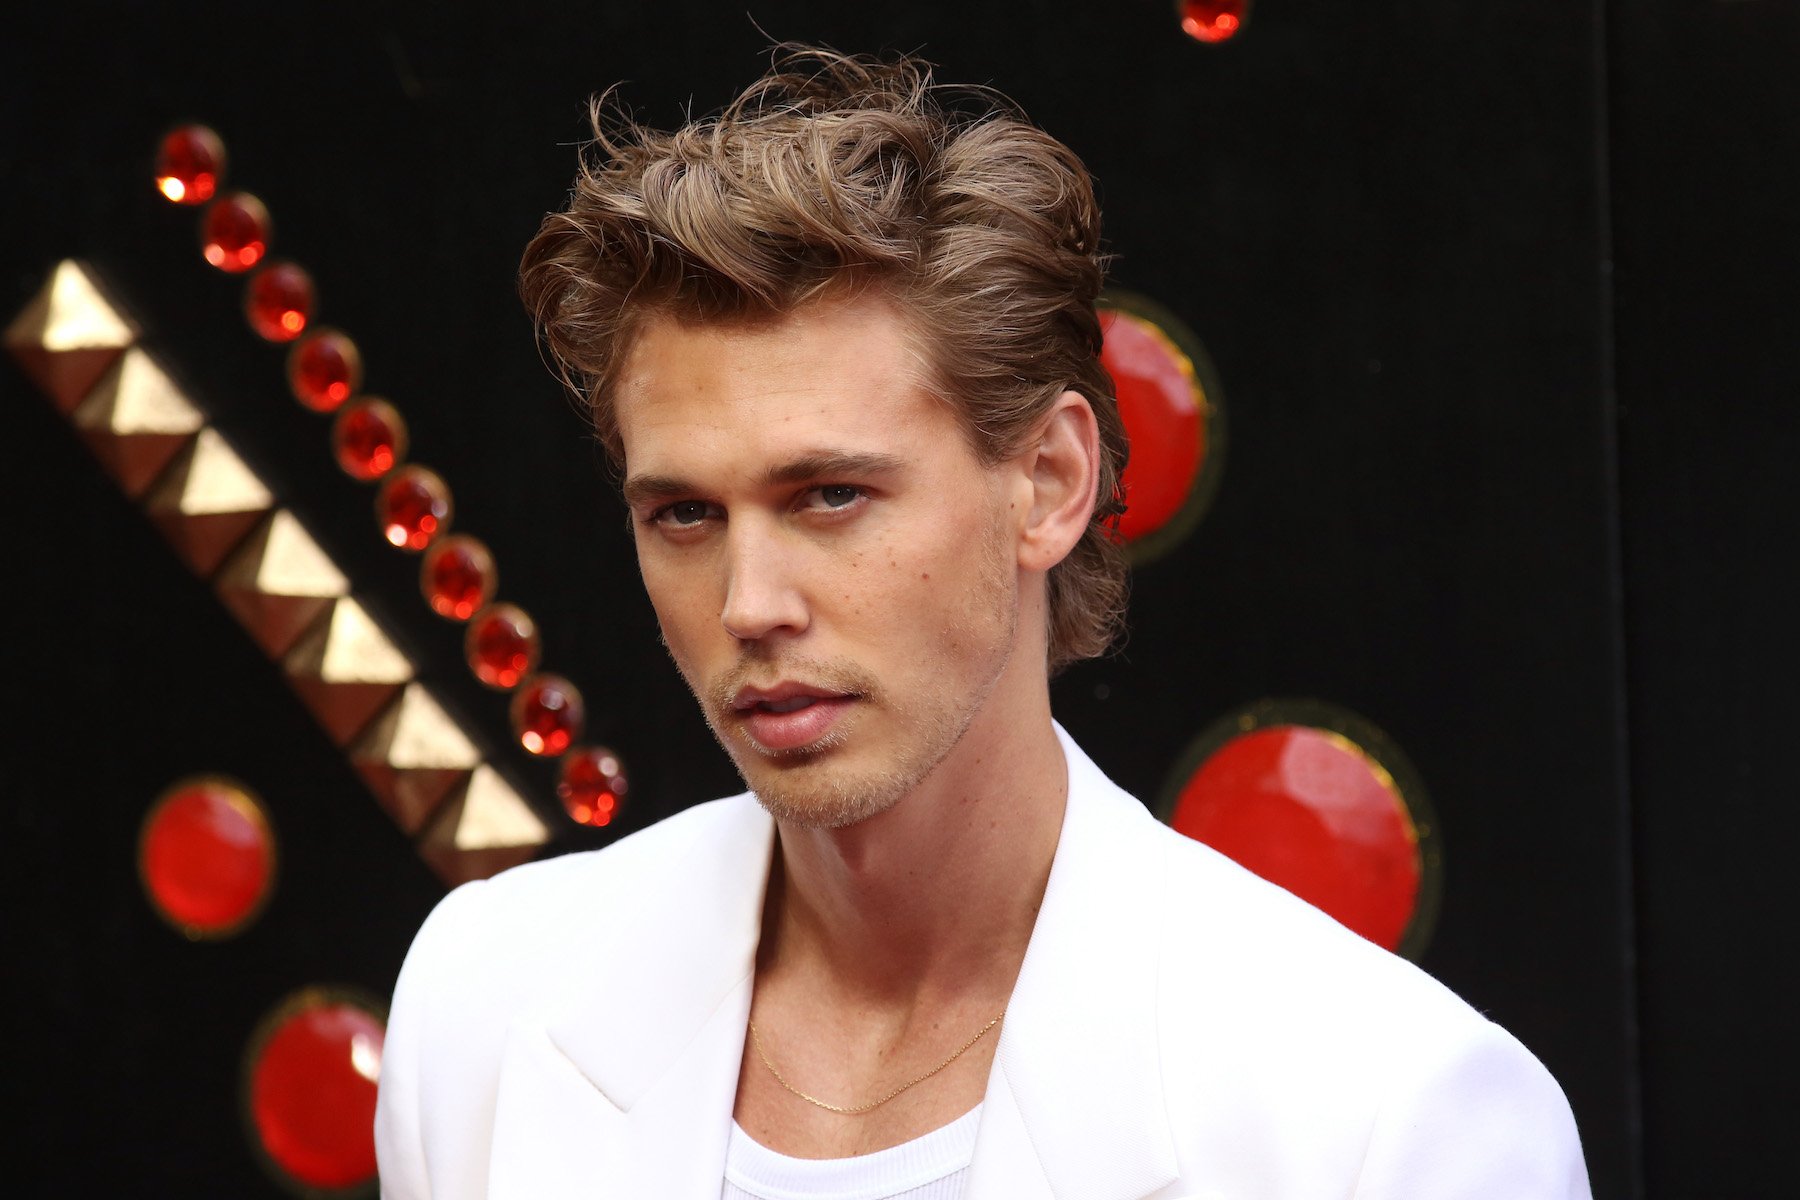 ‘Elvis’: Austin Butler’s Full Elvis Presley Concerts Will Be Shown In a New 4-Hour Version of the Movie